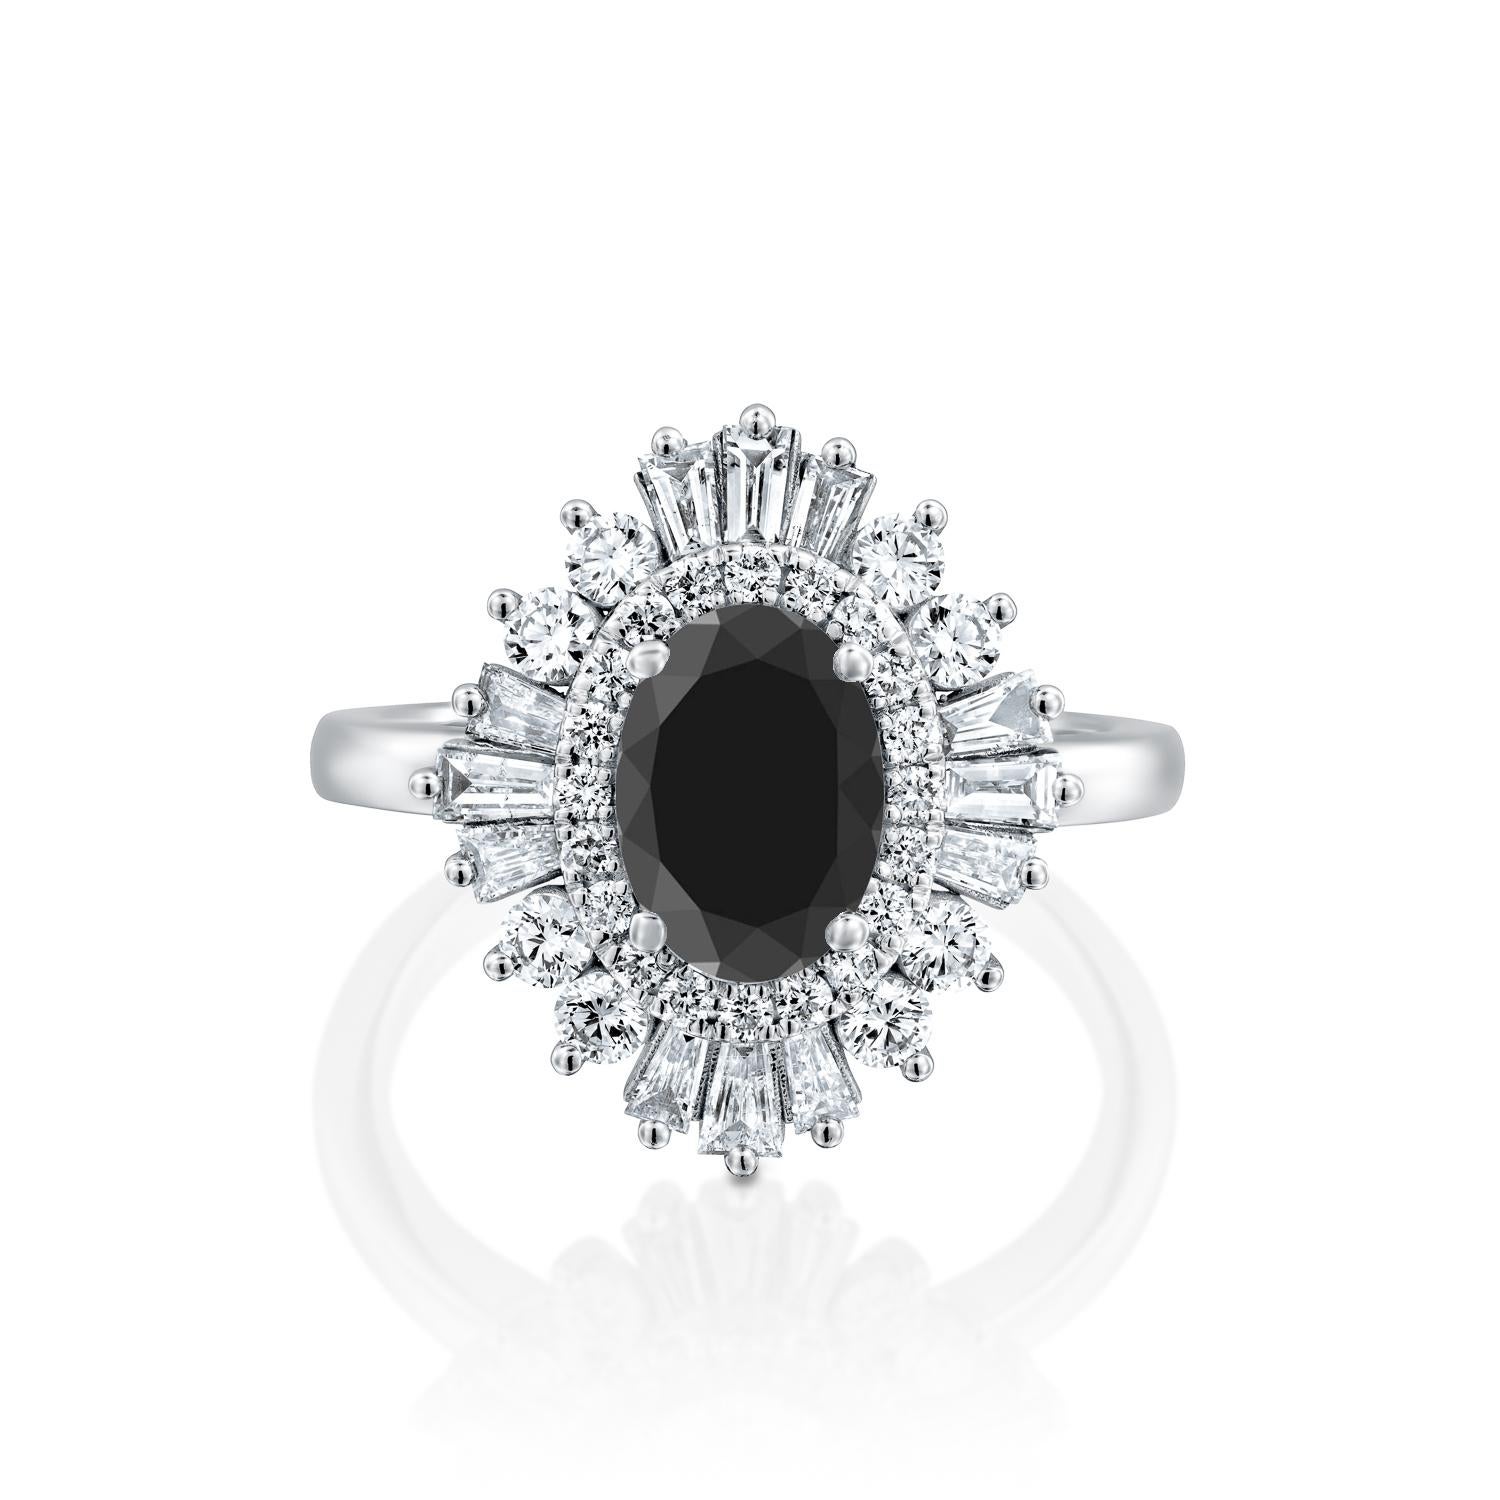 Beautiful solitaire with accents Victorian style diamond engagement ring. Center stone is natural, round shaped, AAA quality Black Diamond of 1.5 carat and it is surrounded by smaller natural diamonds approx. 1 total carat weight. The total carat